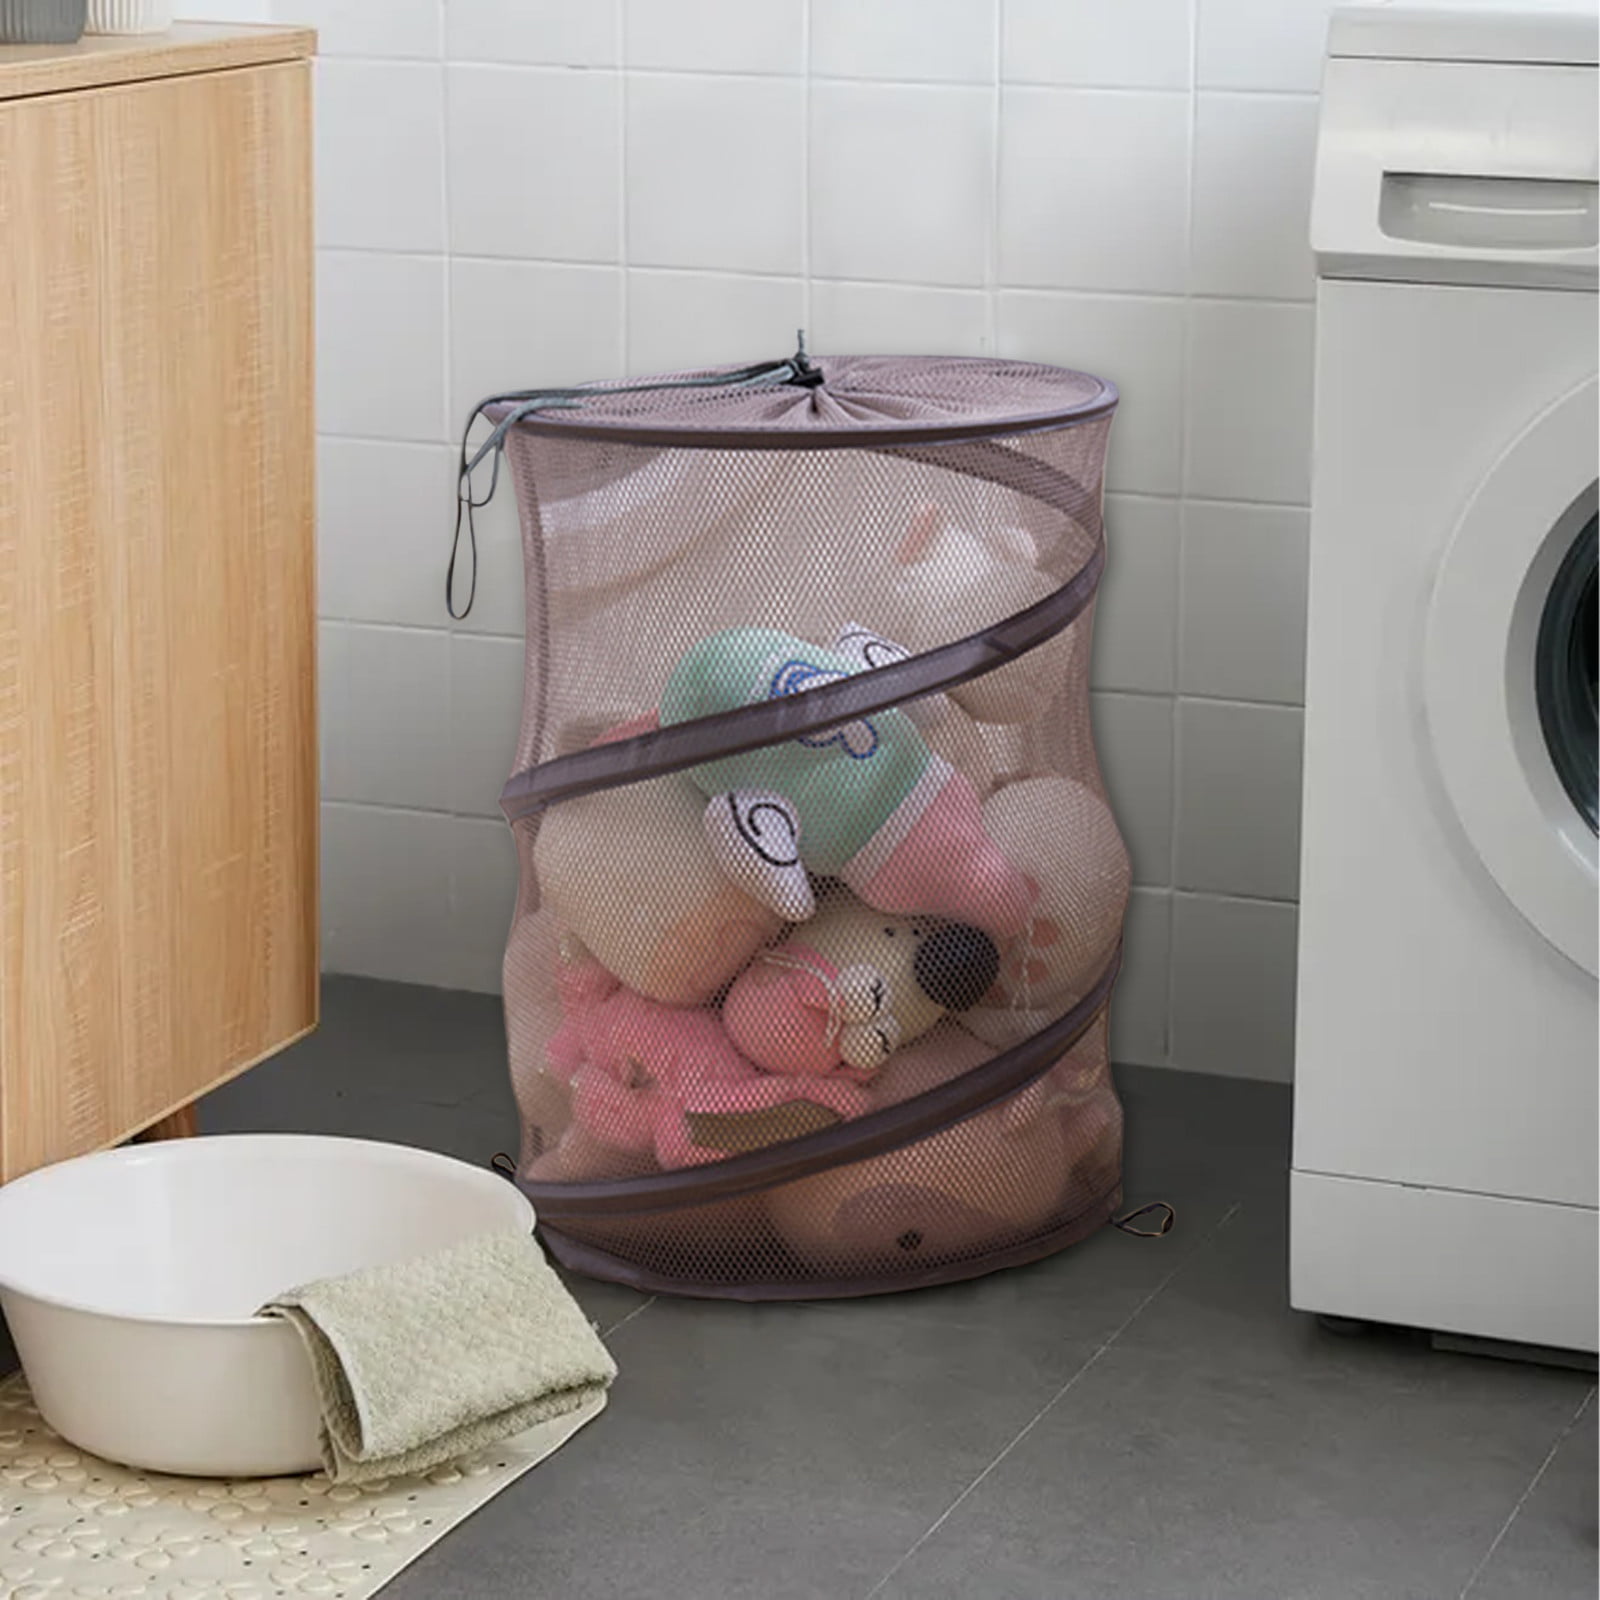 ZIMUHENAI Pop-Up Laundry Basket - Collapsible Laundry Bag with Eco-Friendly  Lycra Material - Popup Laundry Hamper. Laundry Bag, Portable, Collapsible